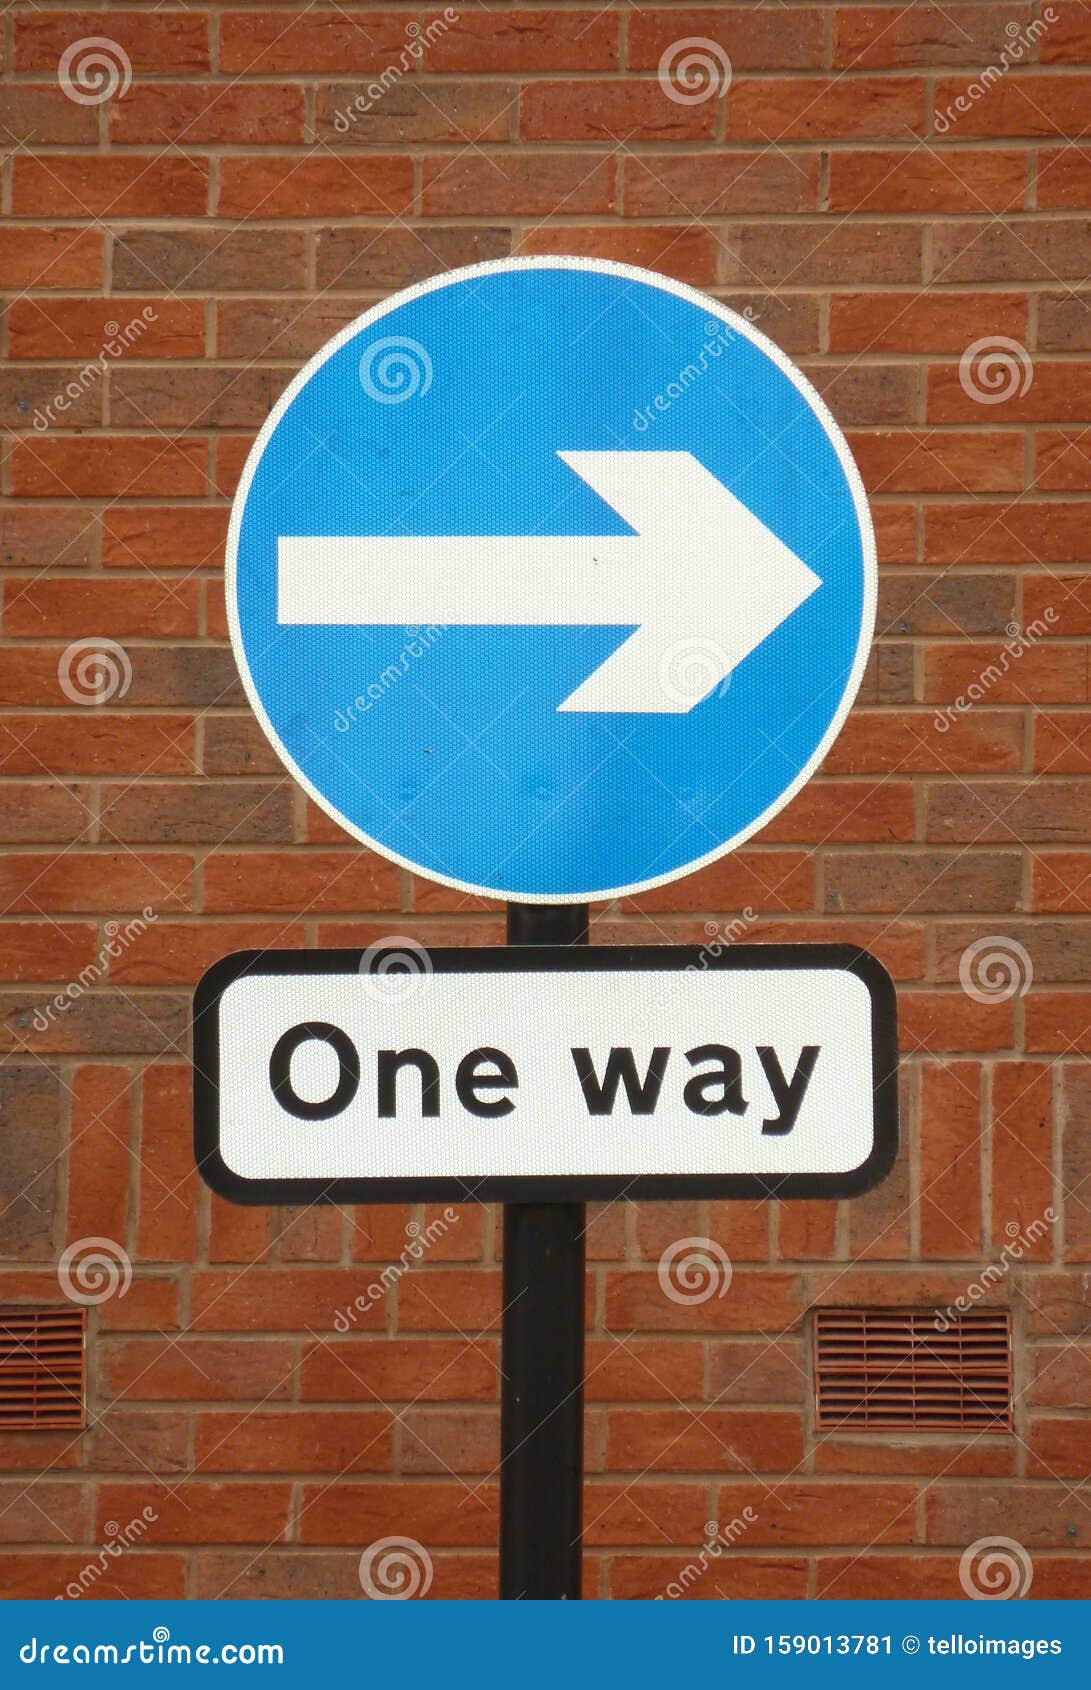 One Way Road Traffic With Arrow Stock Image - Image of information ... One Way Street Signs